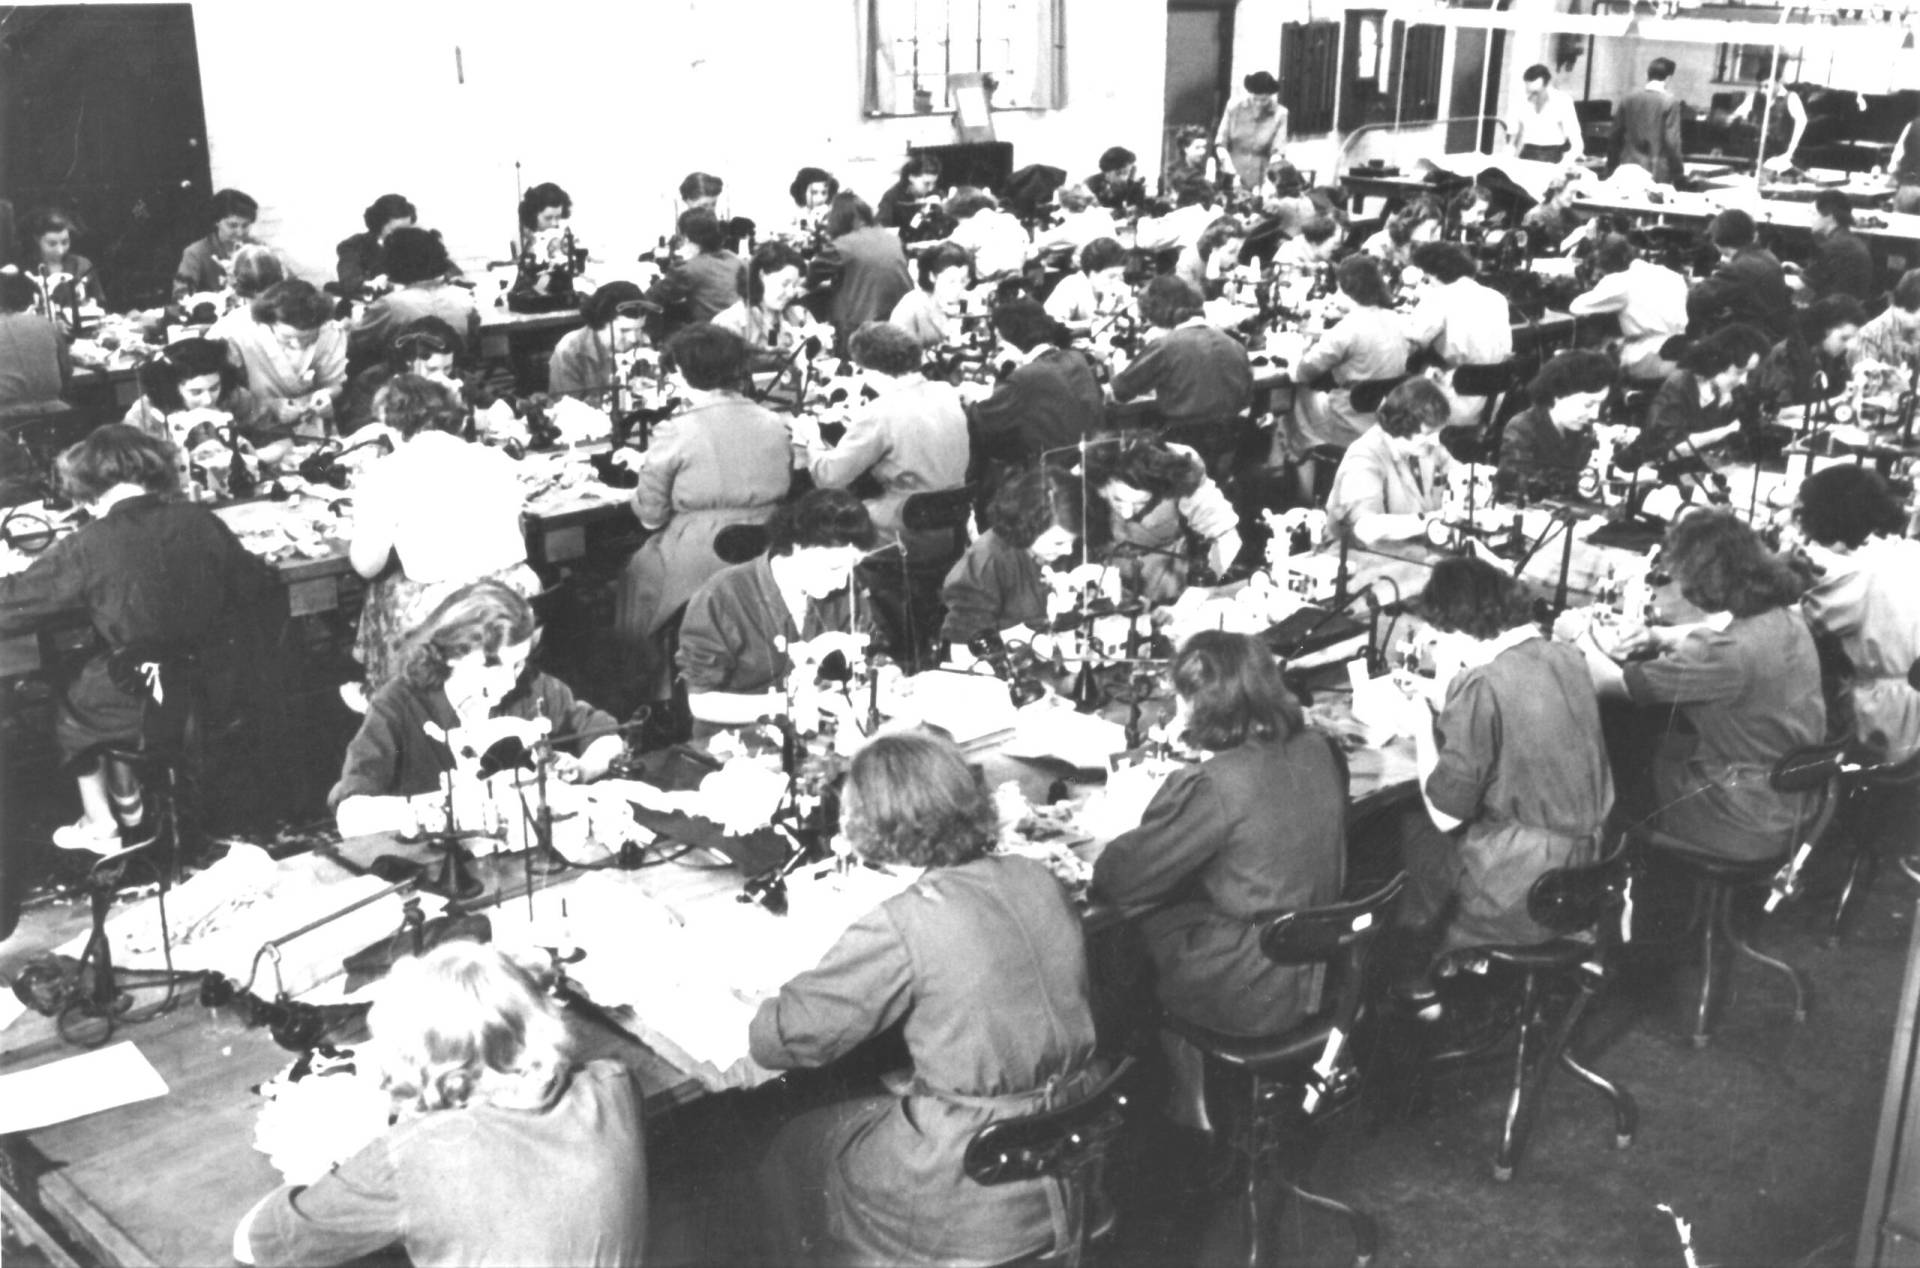 Witham sewing room 1950s